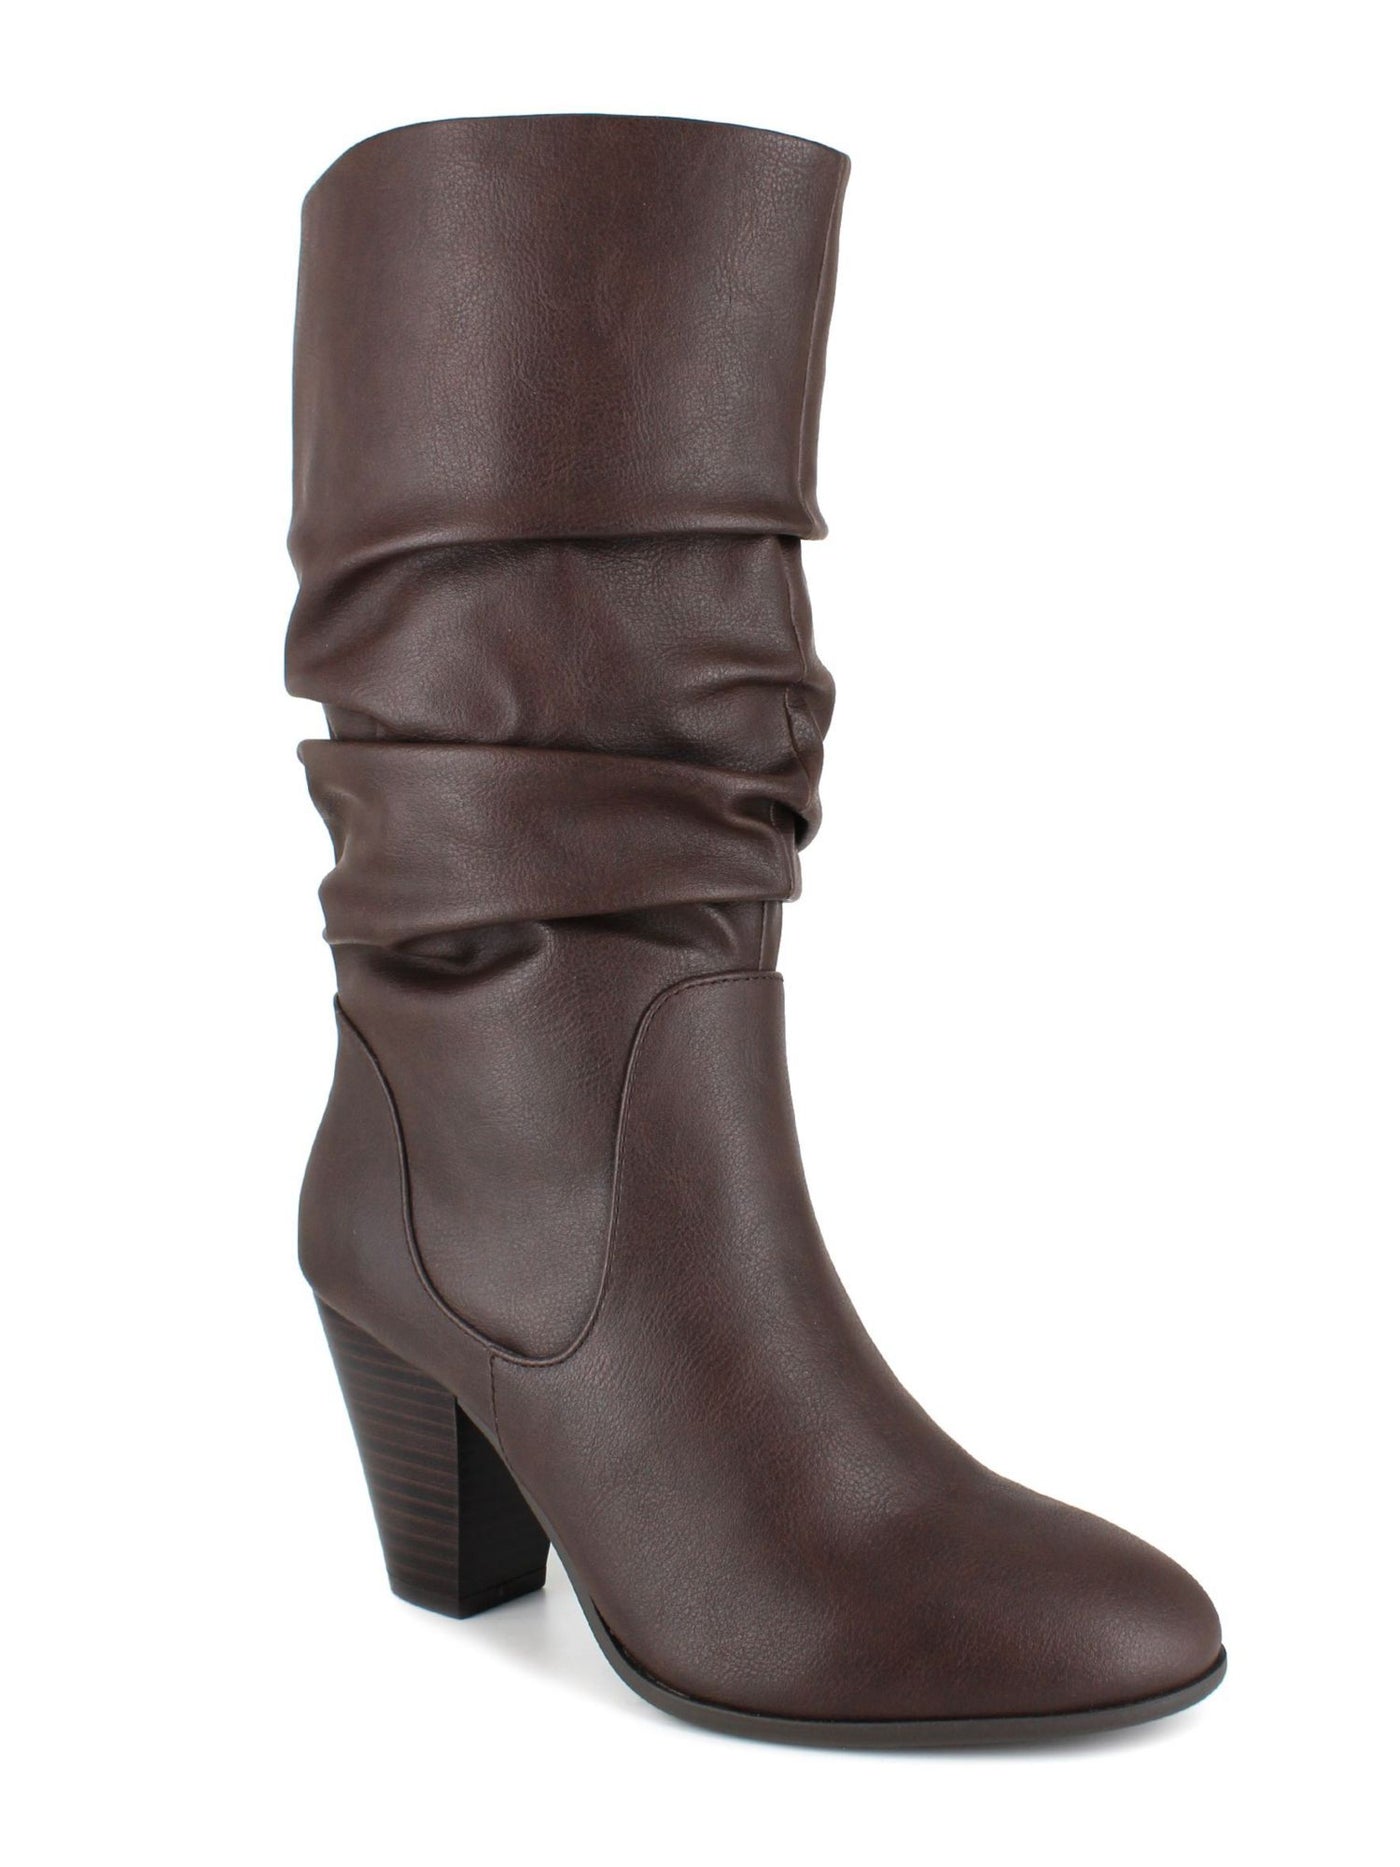 XOXO Womens Brown Padded Oliana Almond Toe Stacked Heel Slouch Boot 7 M